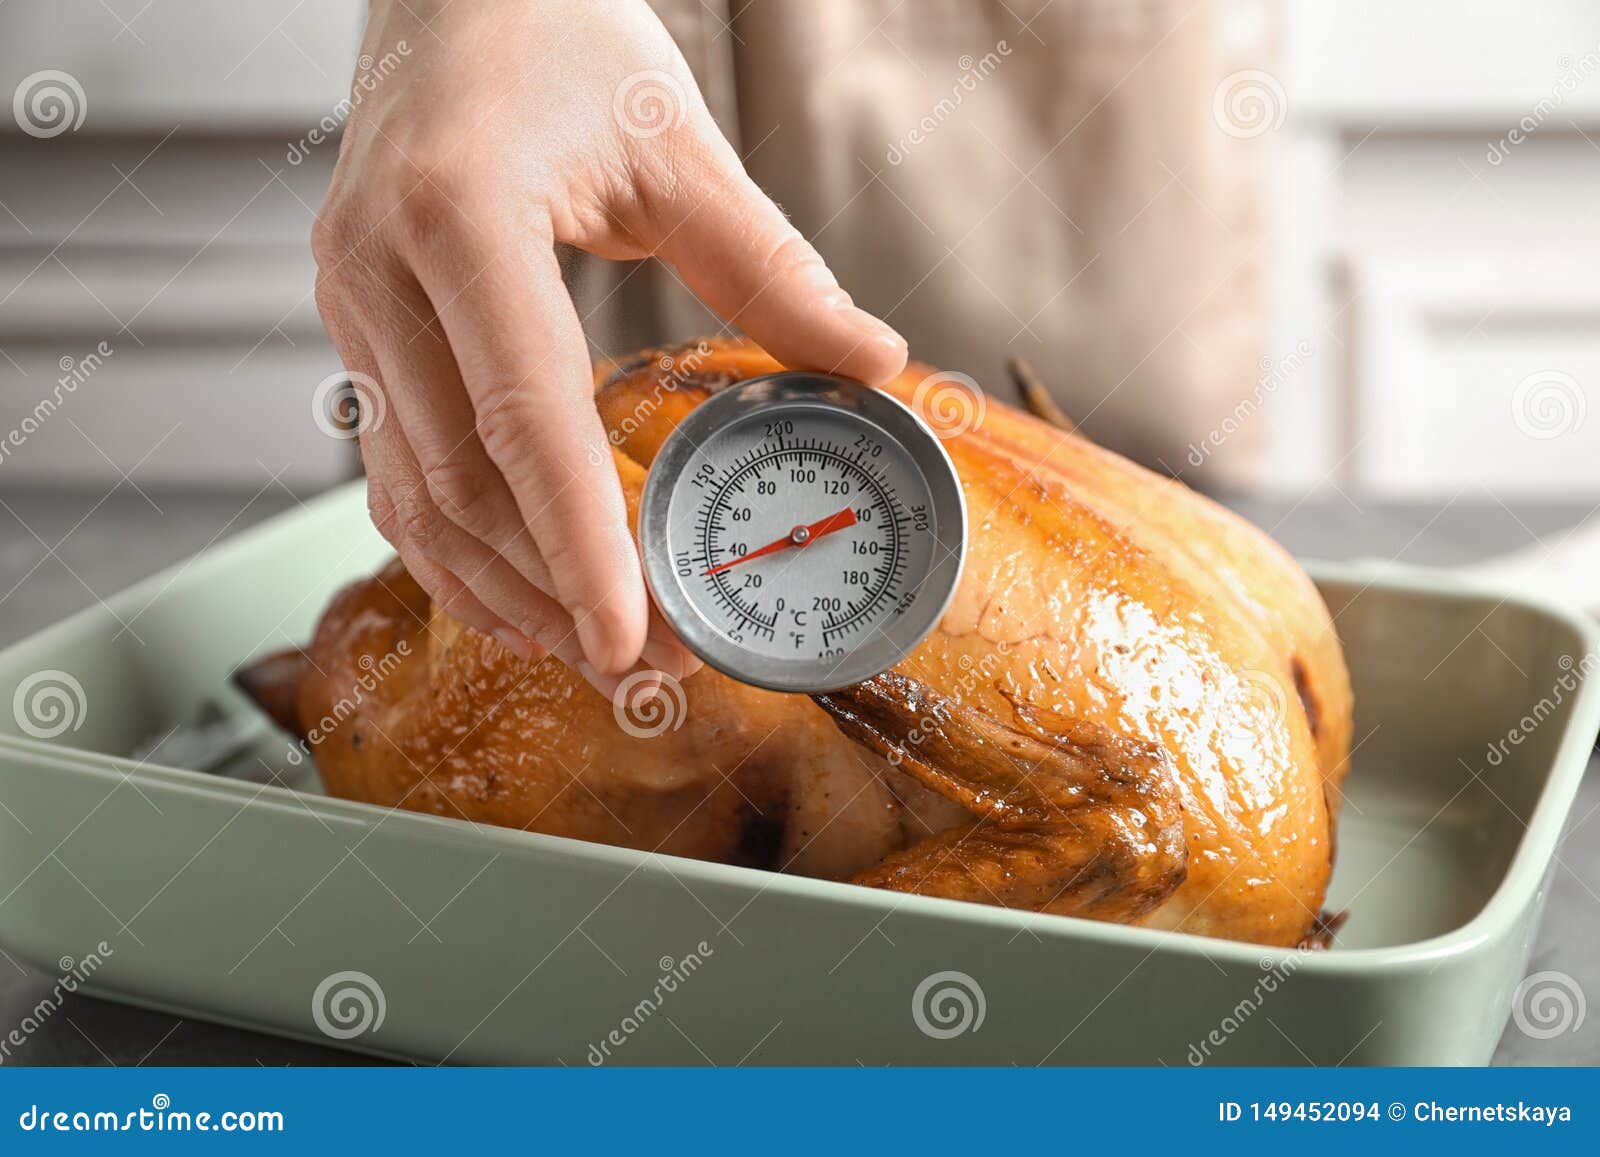 https://thumbs.dreamstime.com/z/woman-measuring-temperature-whole-roasted-turkey-meat-thermometer-closeup-149452094.jpg